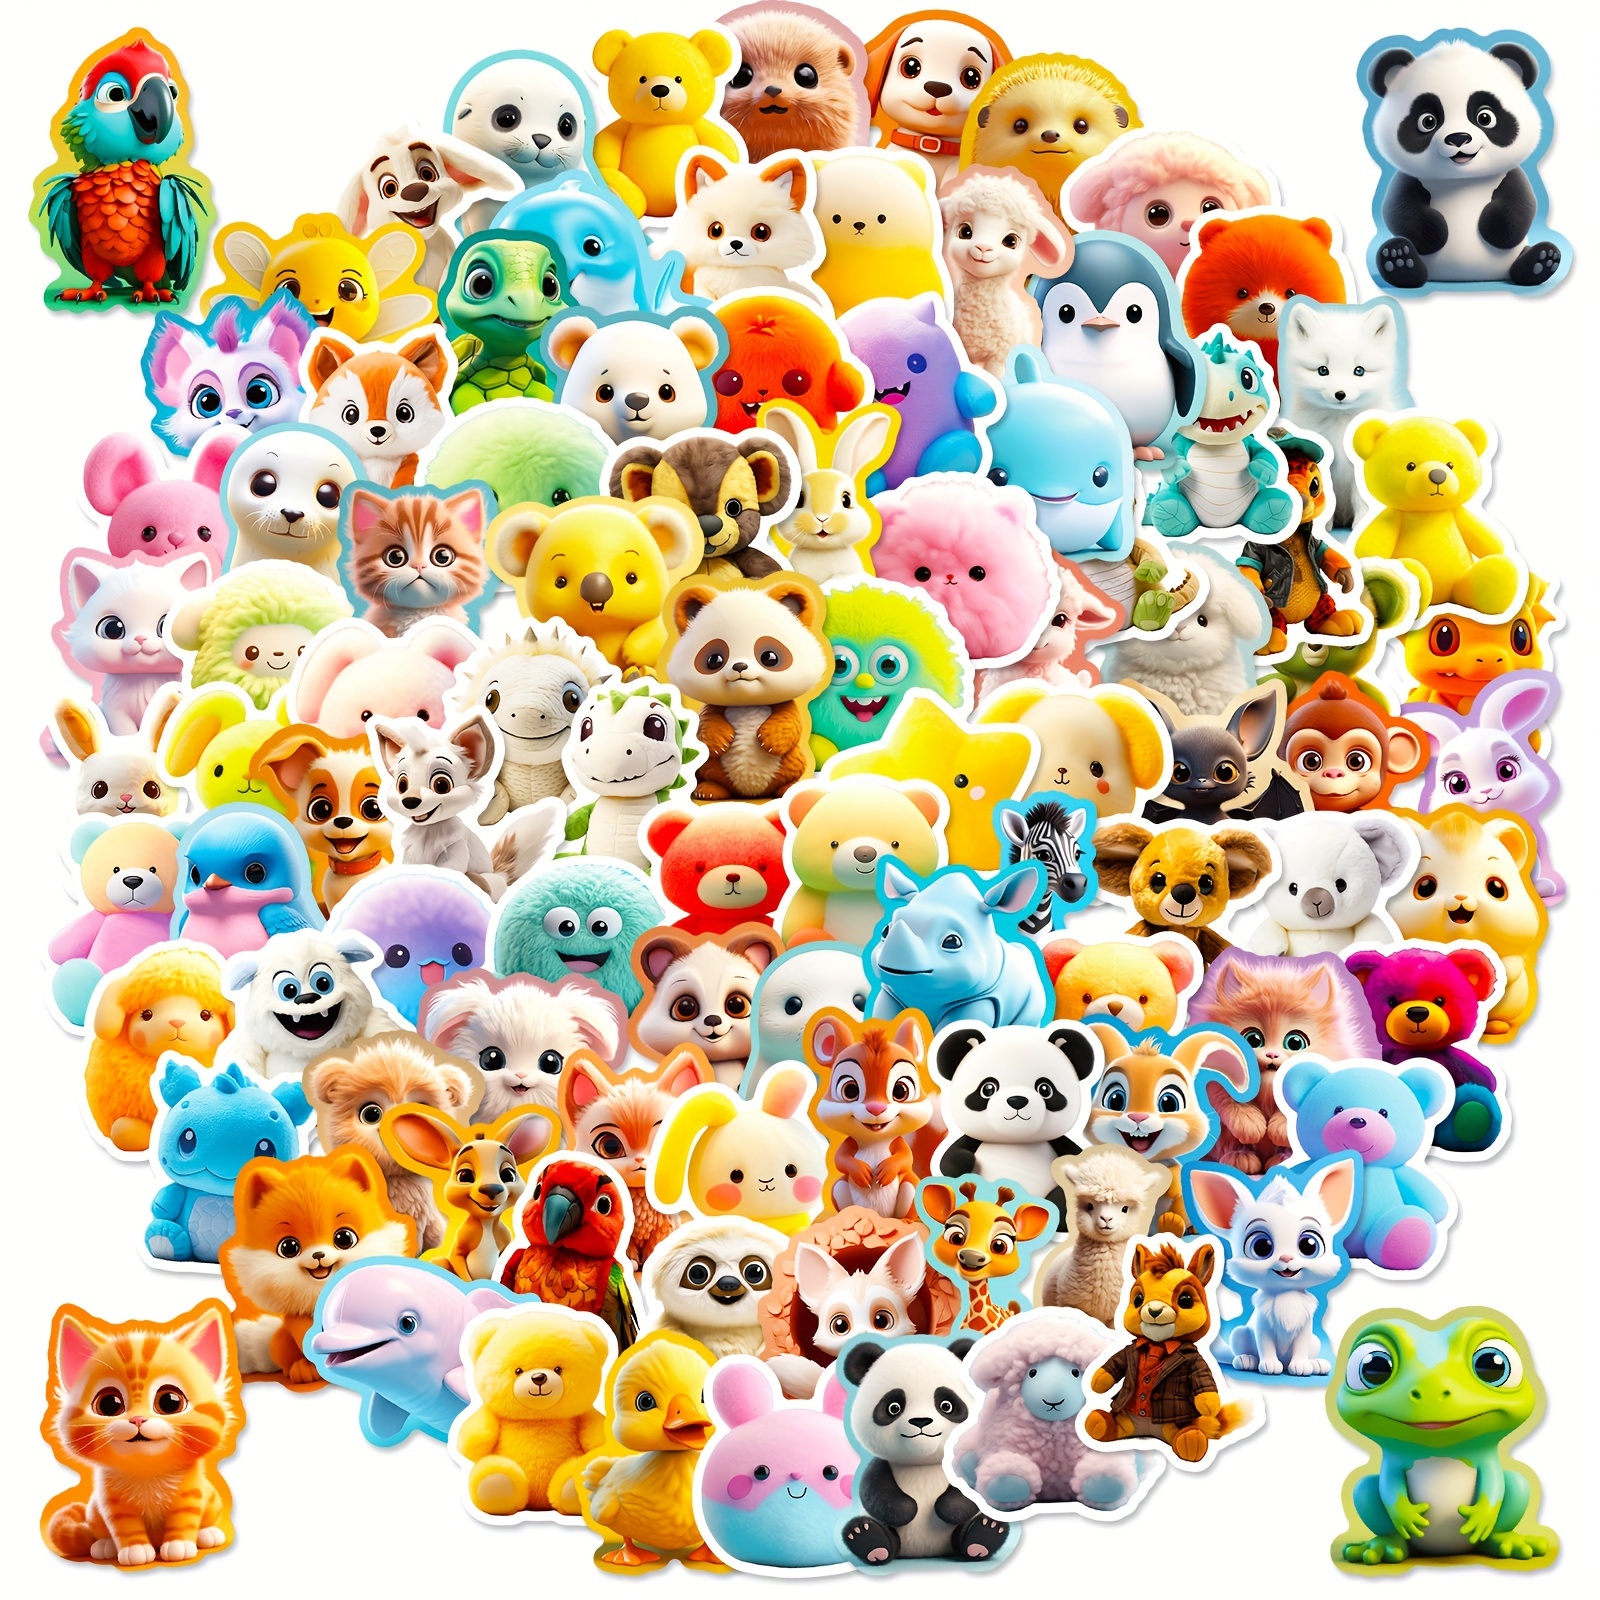 

100pcs 3d Animal Stickers, Cute Cartoon Creative Stickers, For Water Cup Refrigerator Book Luggage Table Helmet Skateboard Camera Guitar Laptop